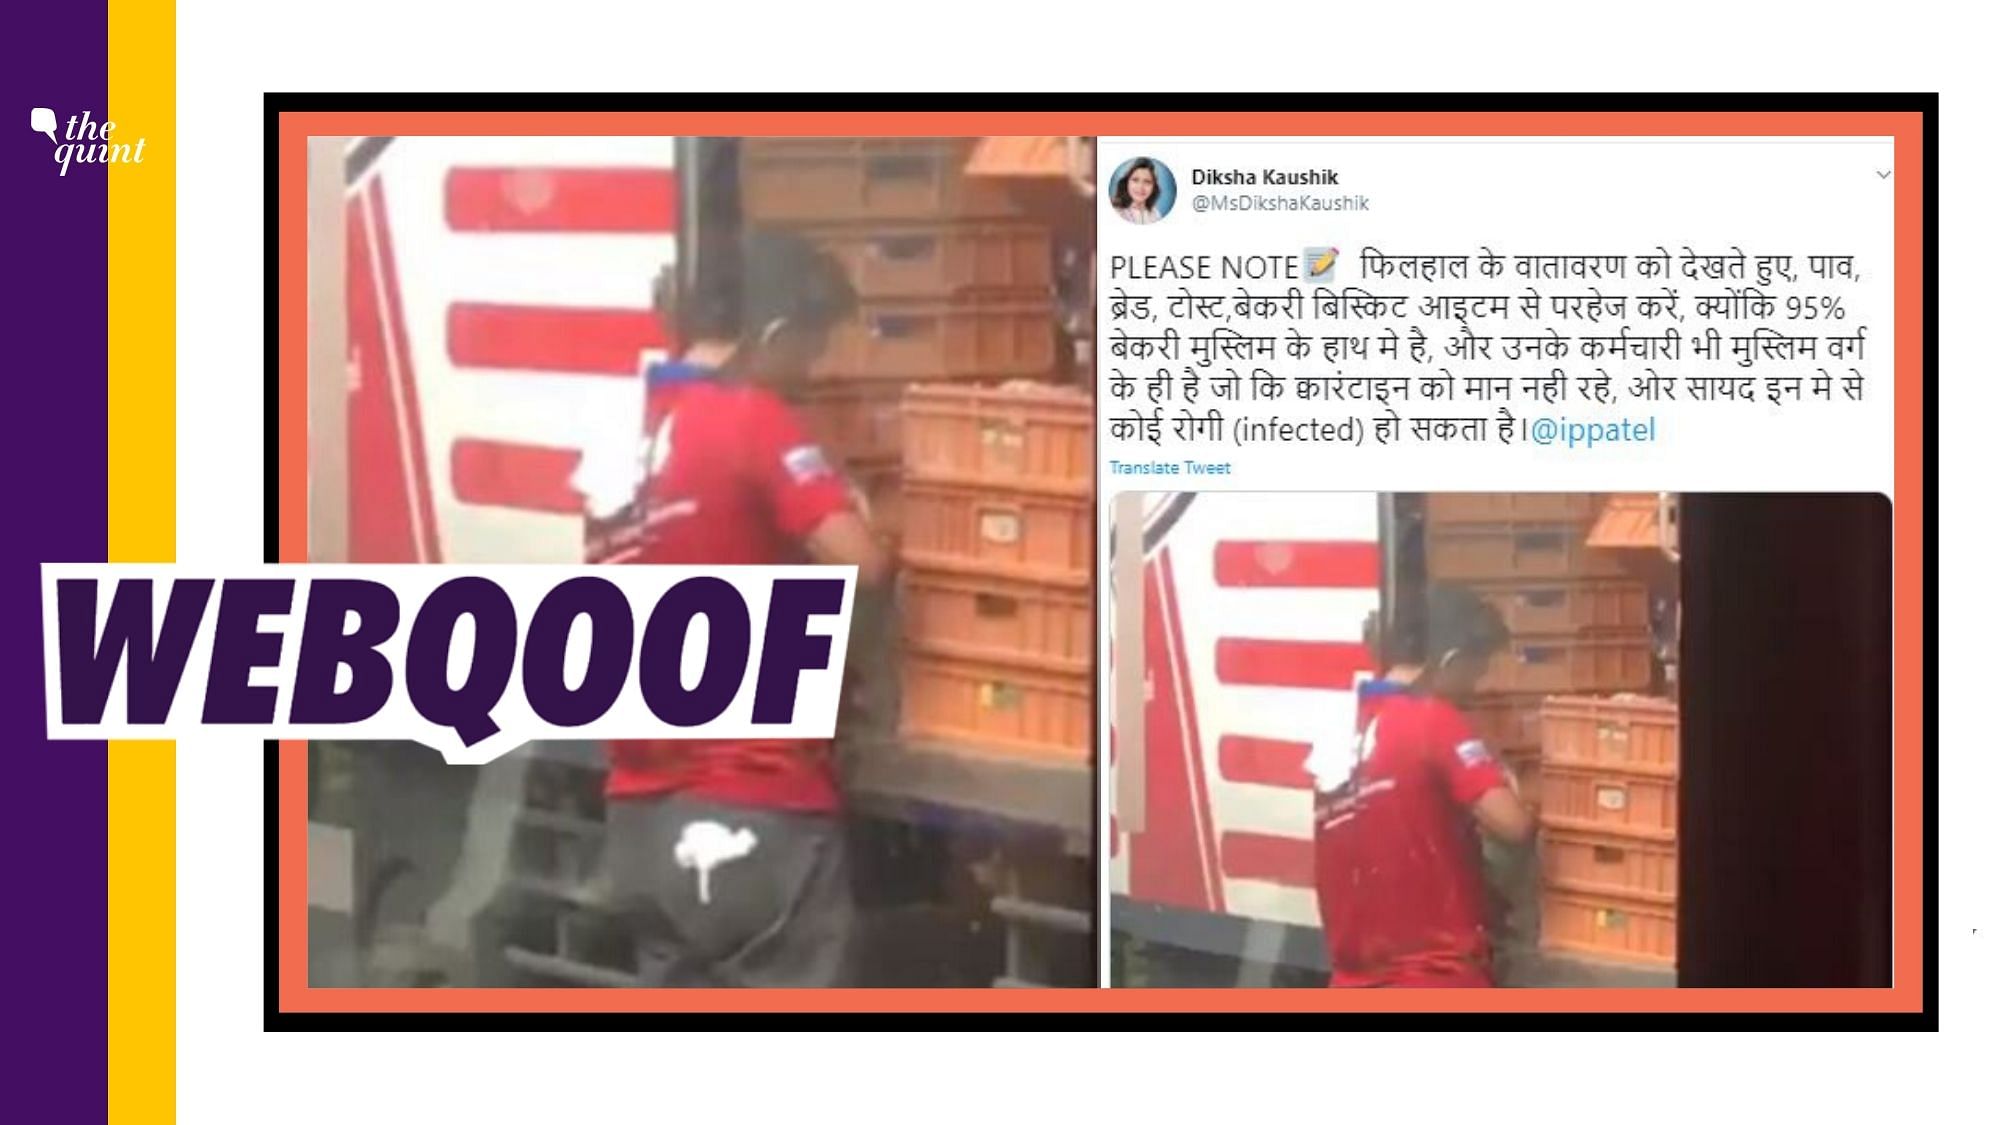 A video of a delivery personnel purportedly tampering with bread products is being widely circulated on social media.